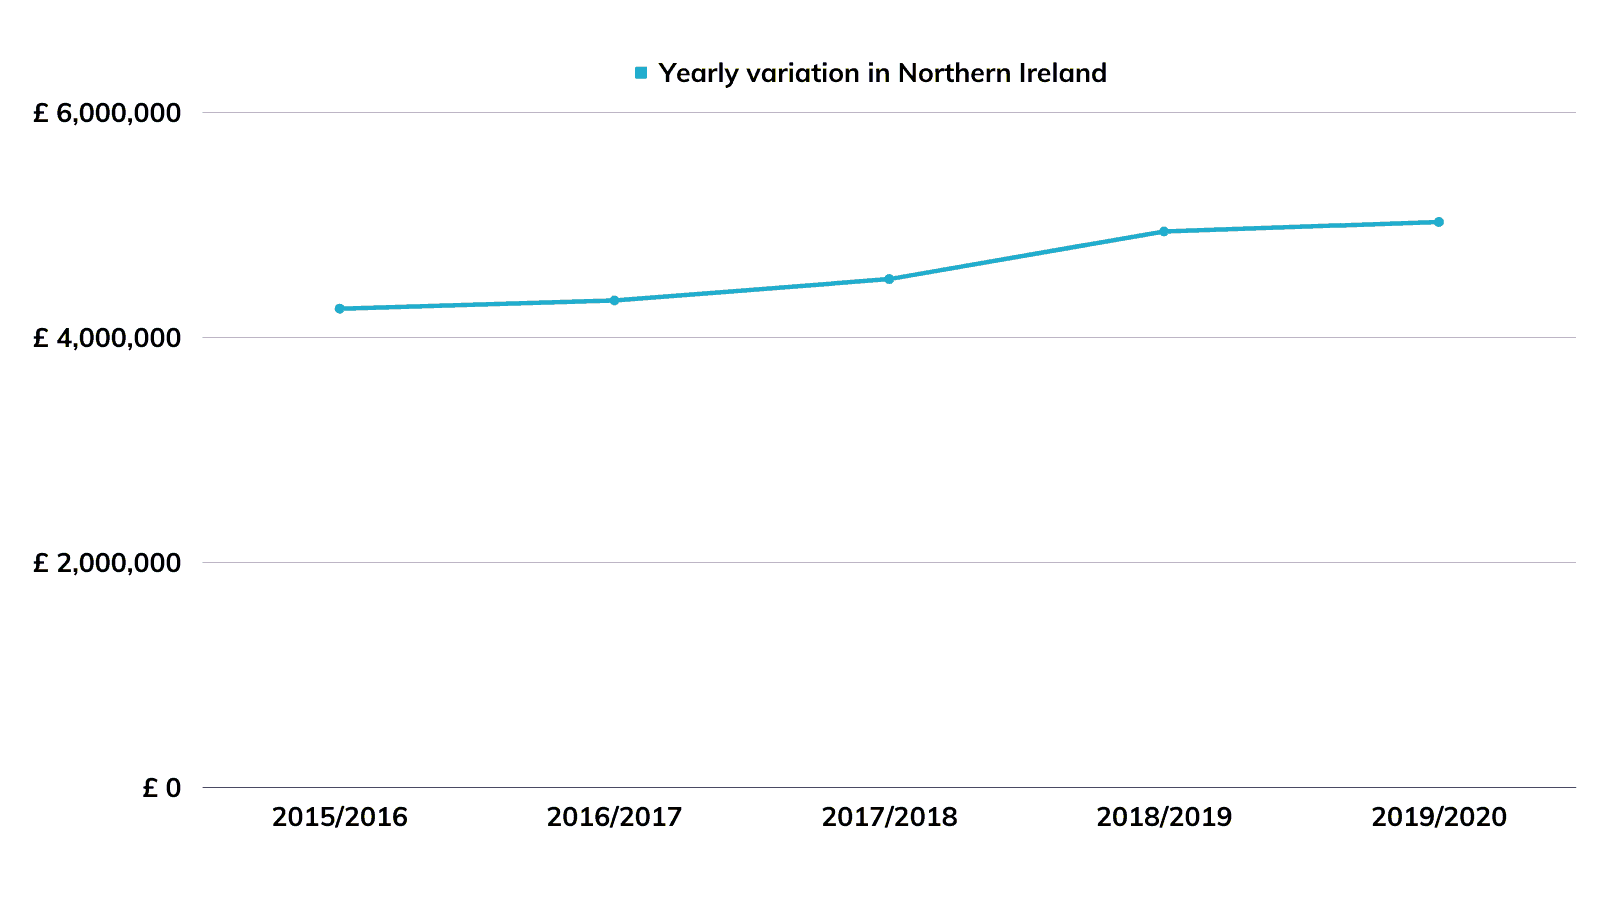 Figure 5 - Yearly variation in spending on translation and interpreting in Northern Ireland between 2015/2016 and 2019/2020